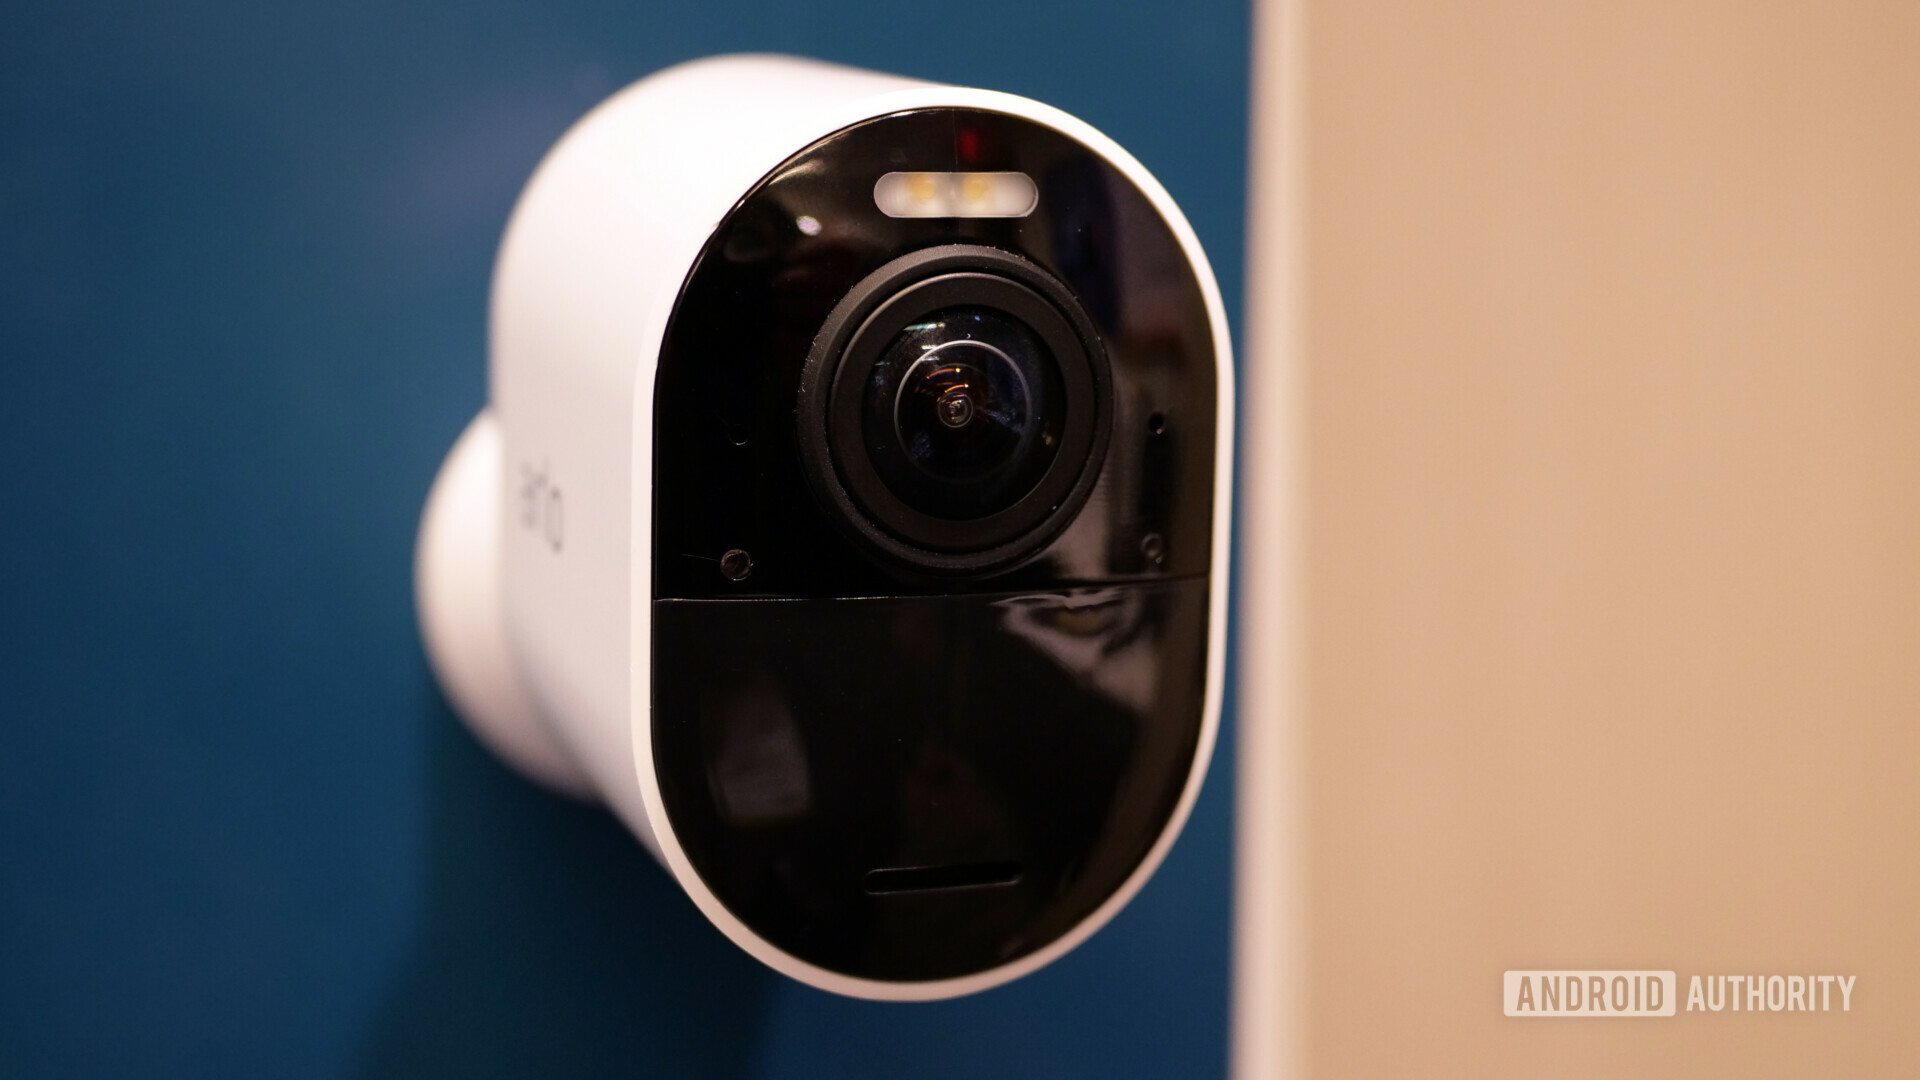 Avonturier Inpakken thee Smart security cameras: Here are the best ones to spend your money on